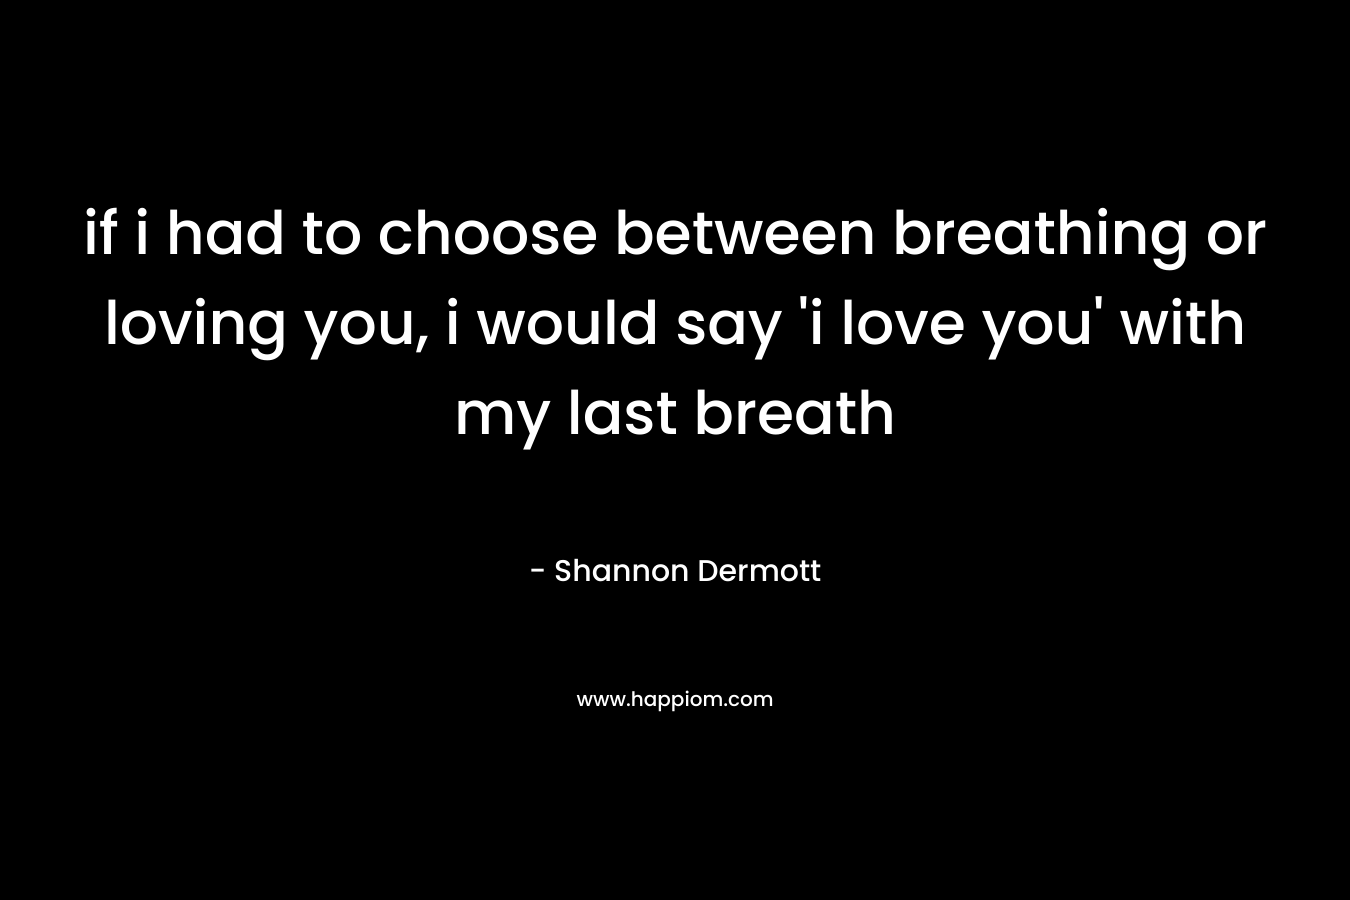 if i had to choose between breathing or loving you, i would say ‘i love you’ with my last breath – Shannon Dermott